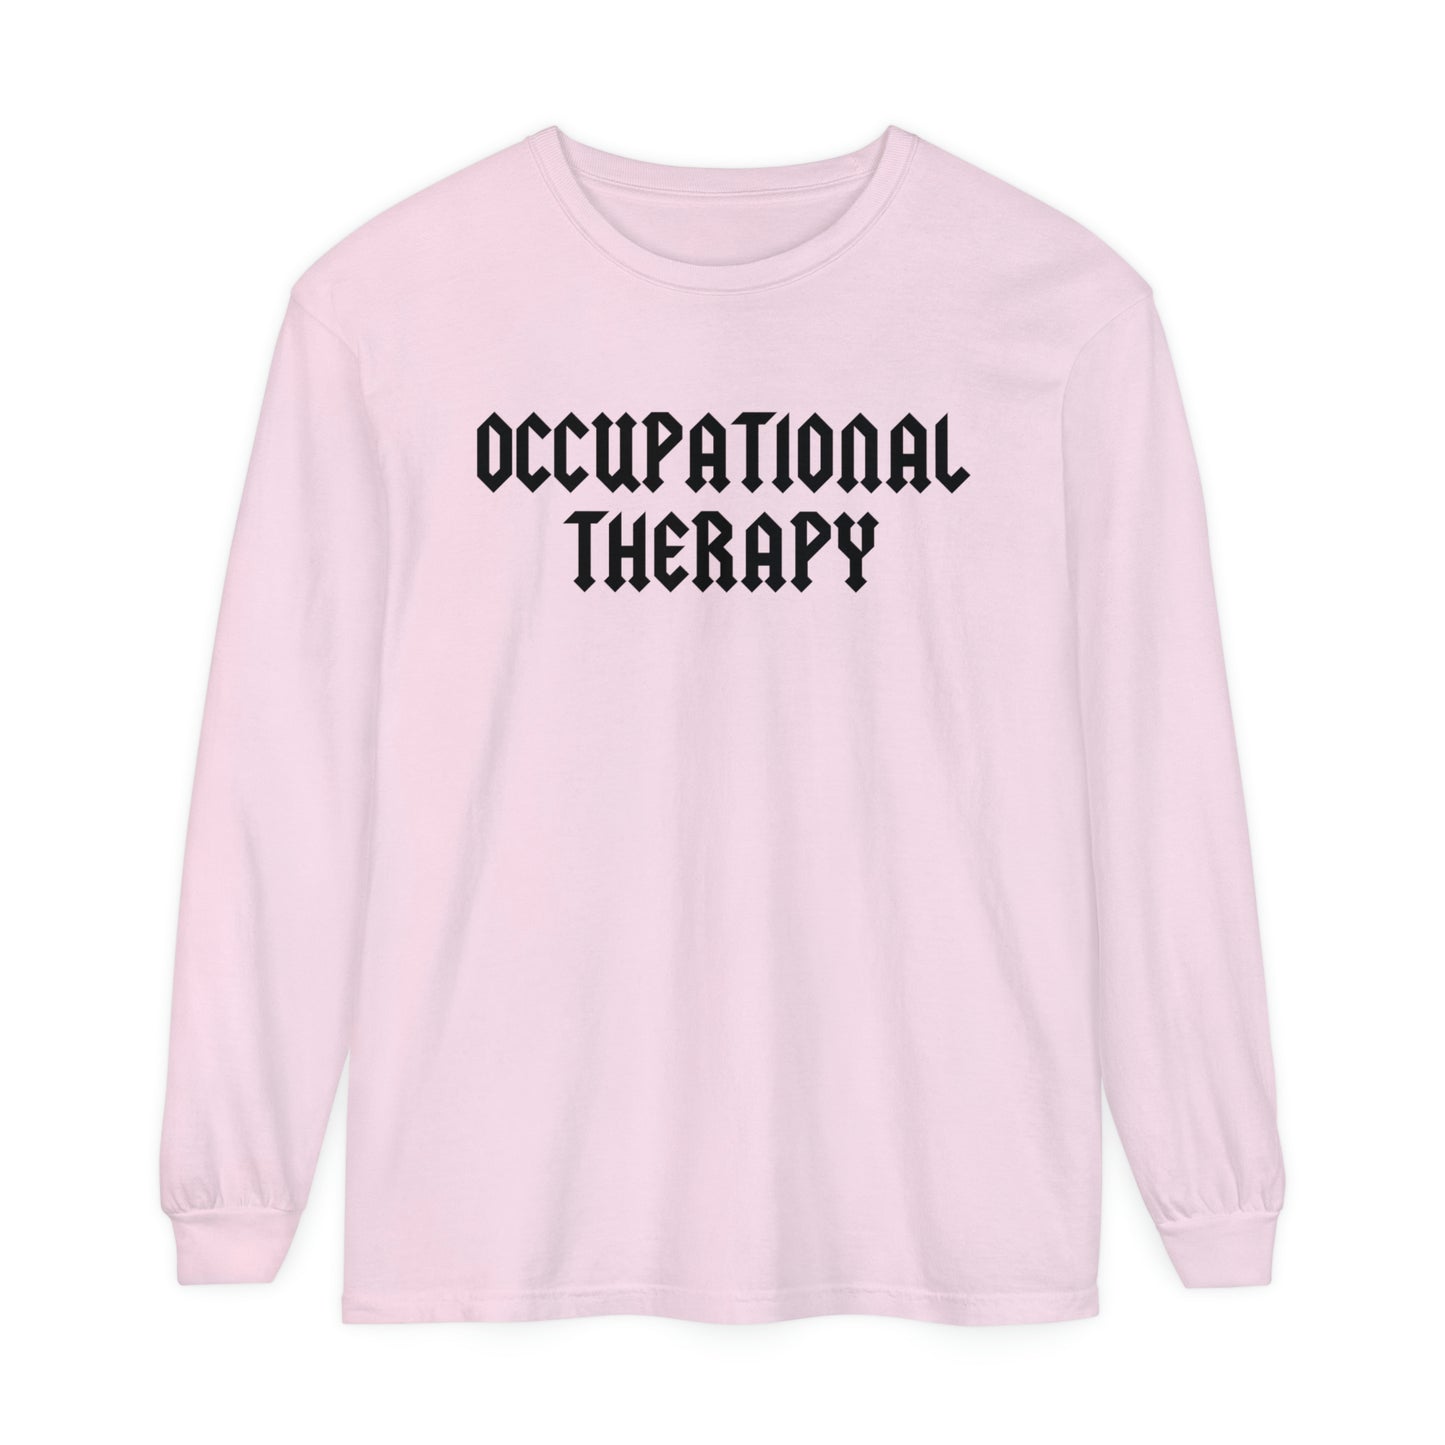 Occupational Therapy Band Inspired Long Sleeve Comfort Colors T-Shirt